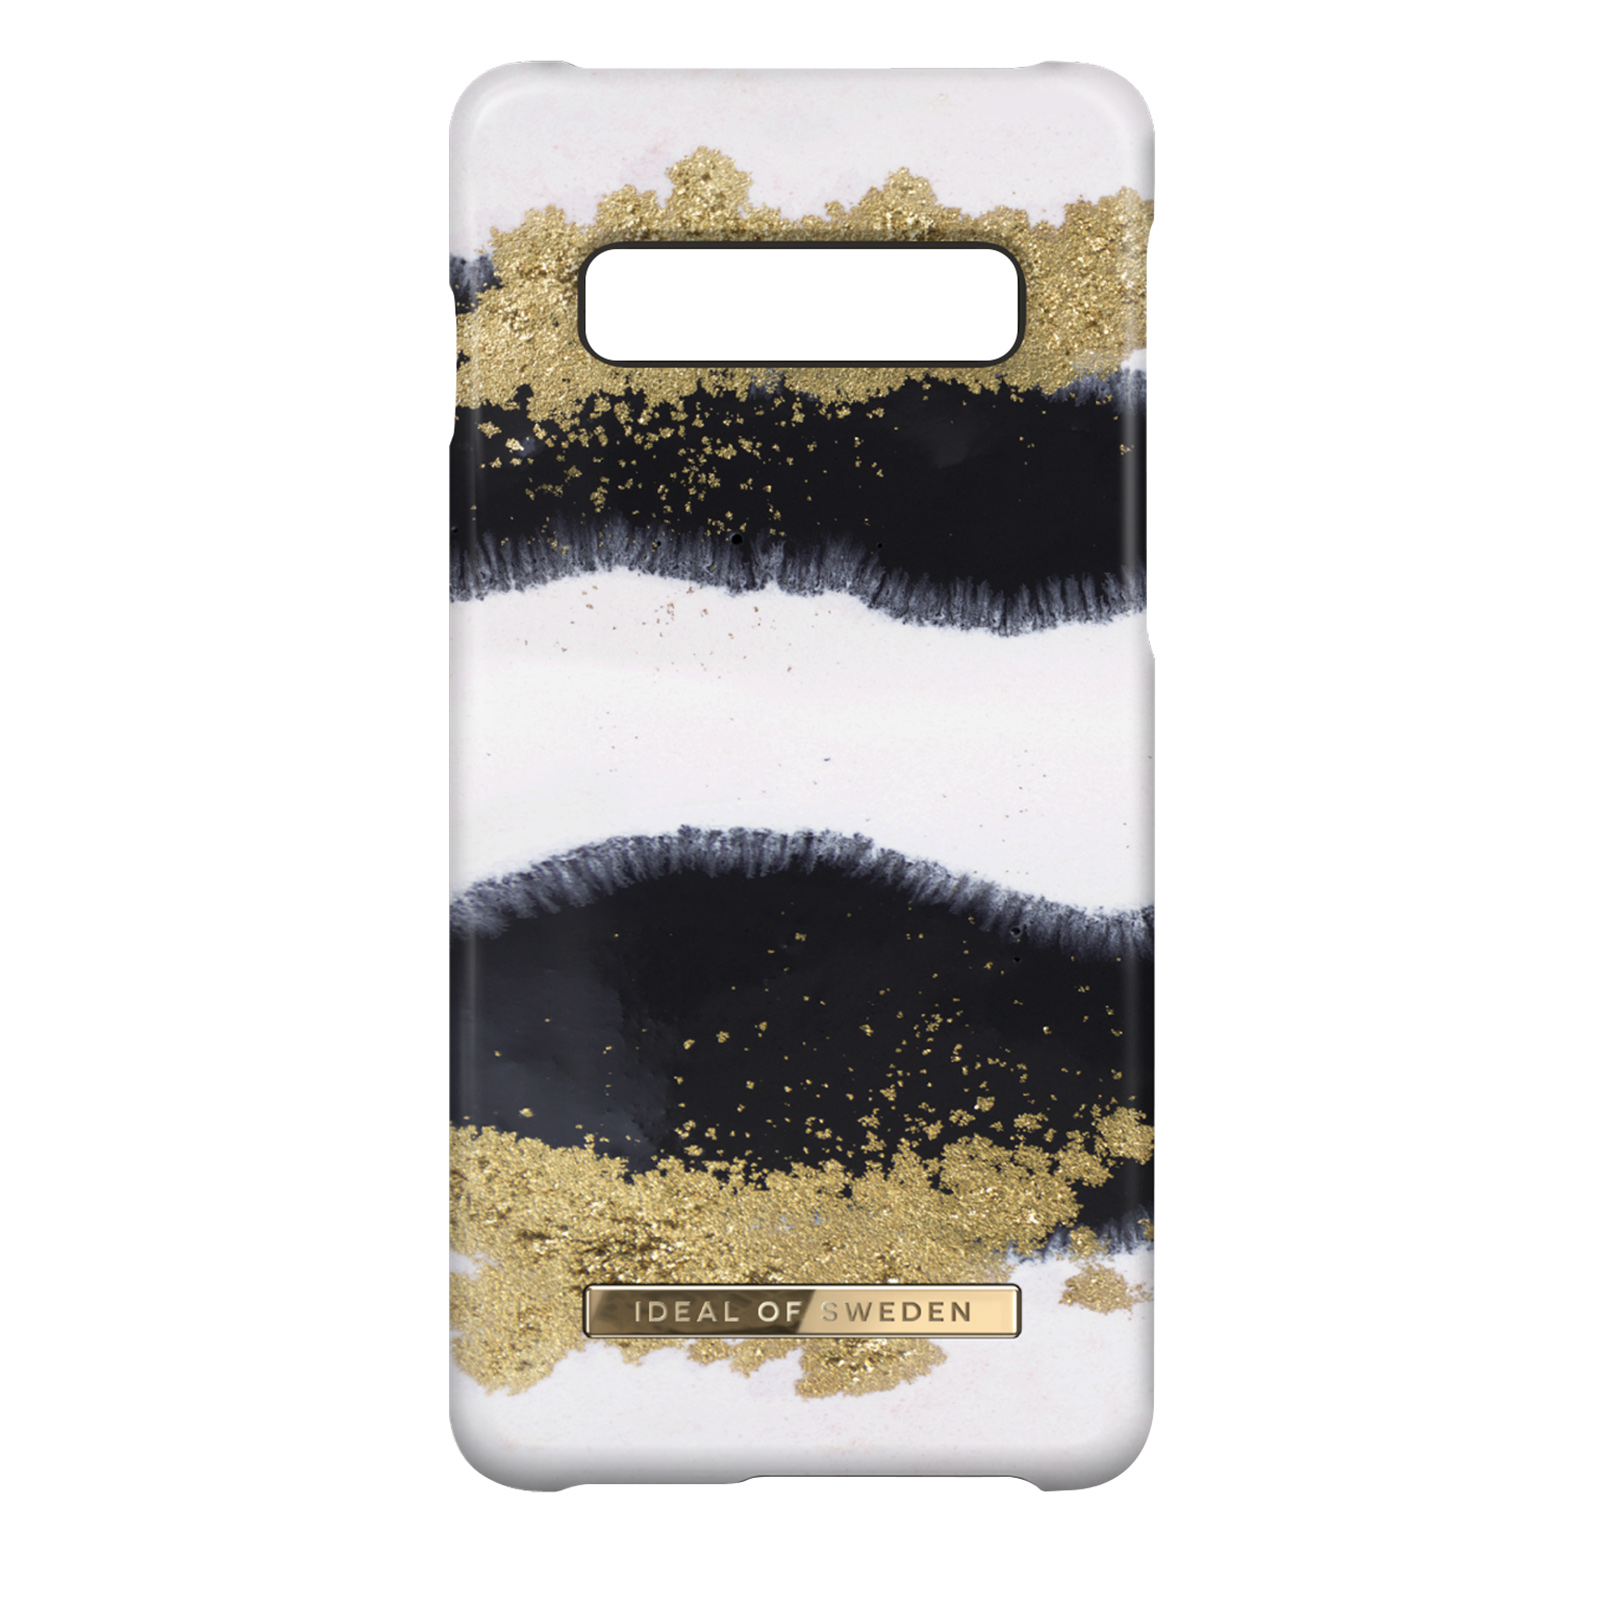 SWEDEN Galaxy Licorice Gold Gleaming Samsung, OF IDEAL S10, Series, Backcover,